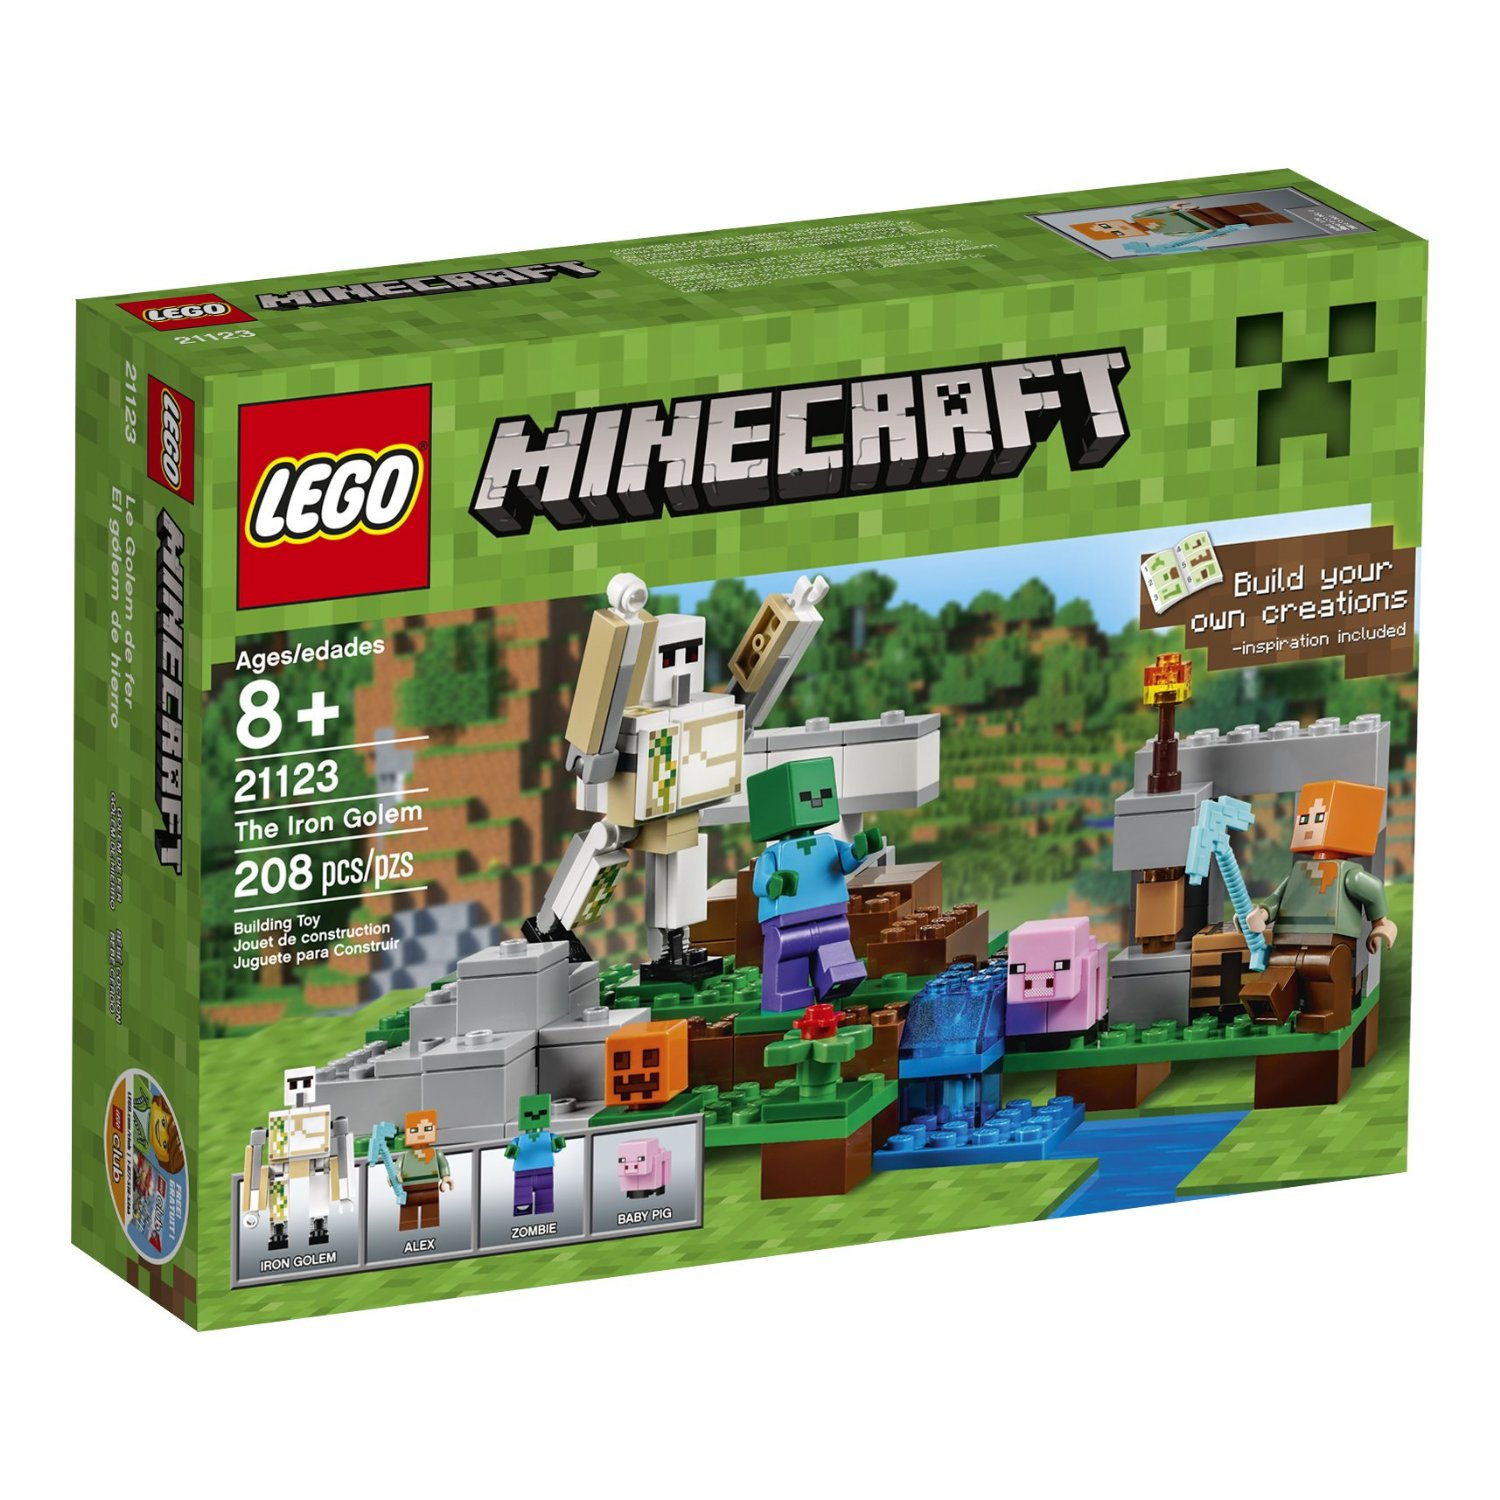 LEGO Minecraft The Iron Golem Only $15.99! That’s 20% Off The Listed Price!